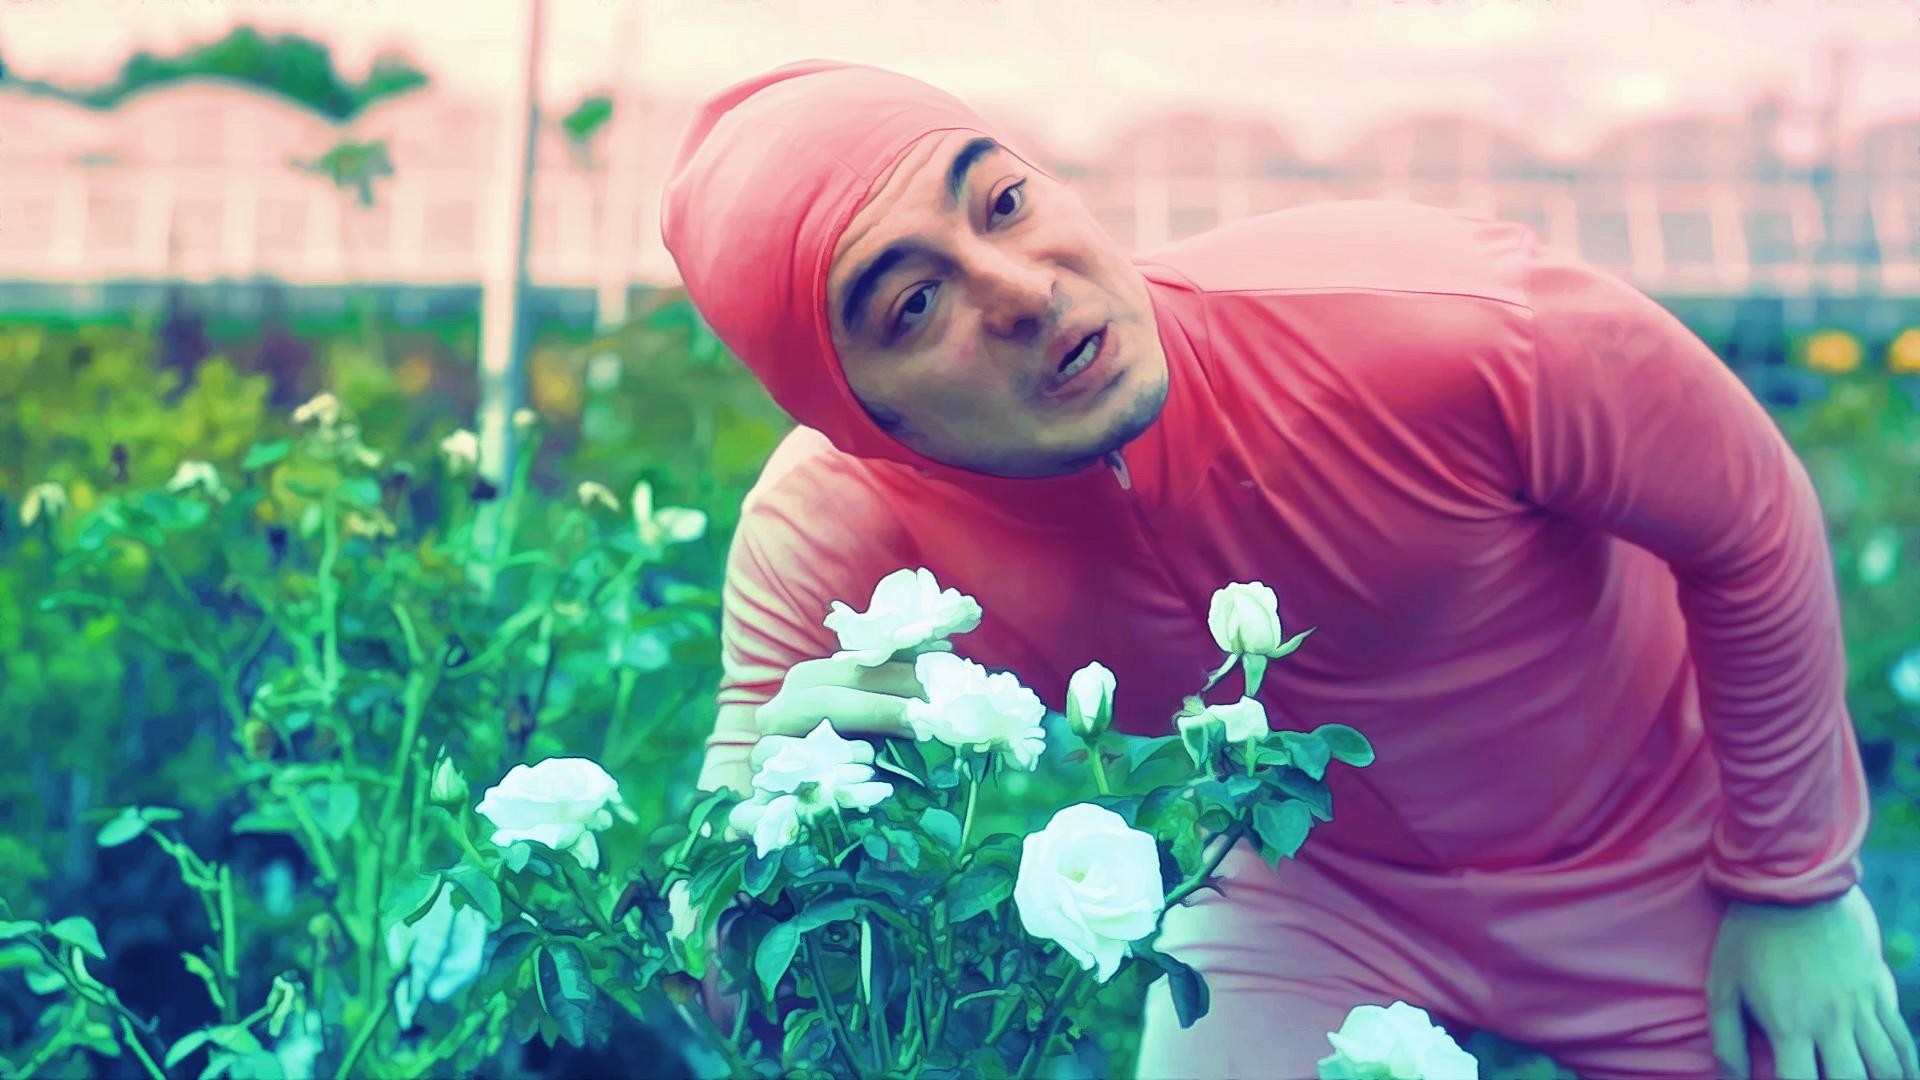 Pink Guy wallpaper ·① Download free HD wallpapers for ...